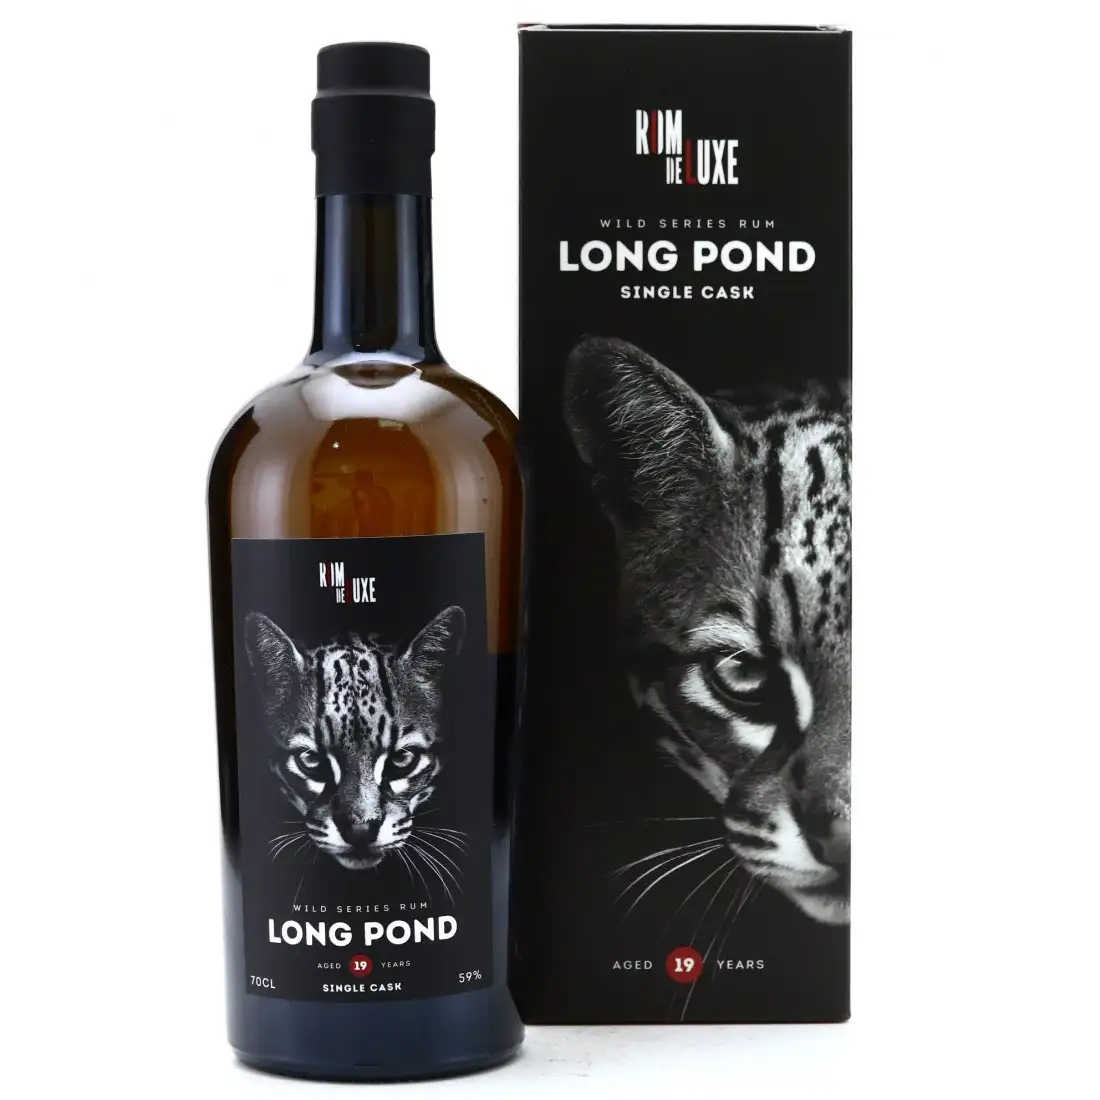 Image of the front of the bottle of the rum Wild Series Rum Long Pond No. 9